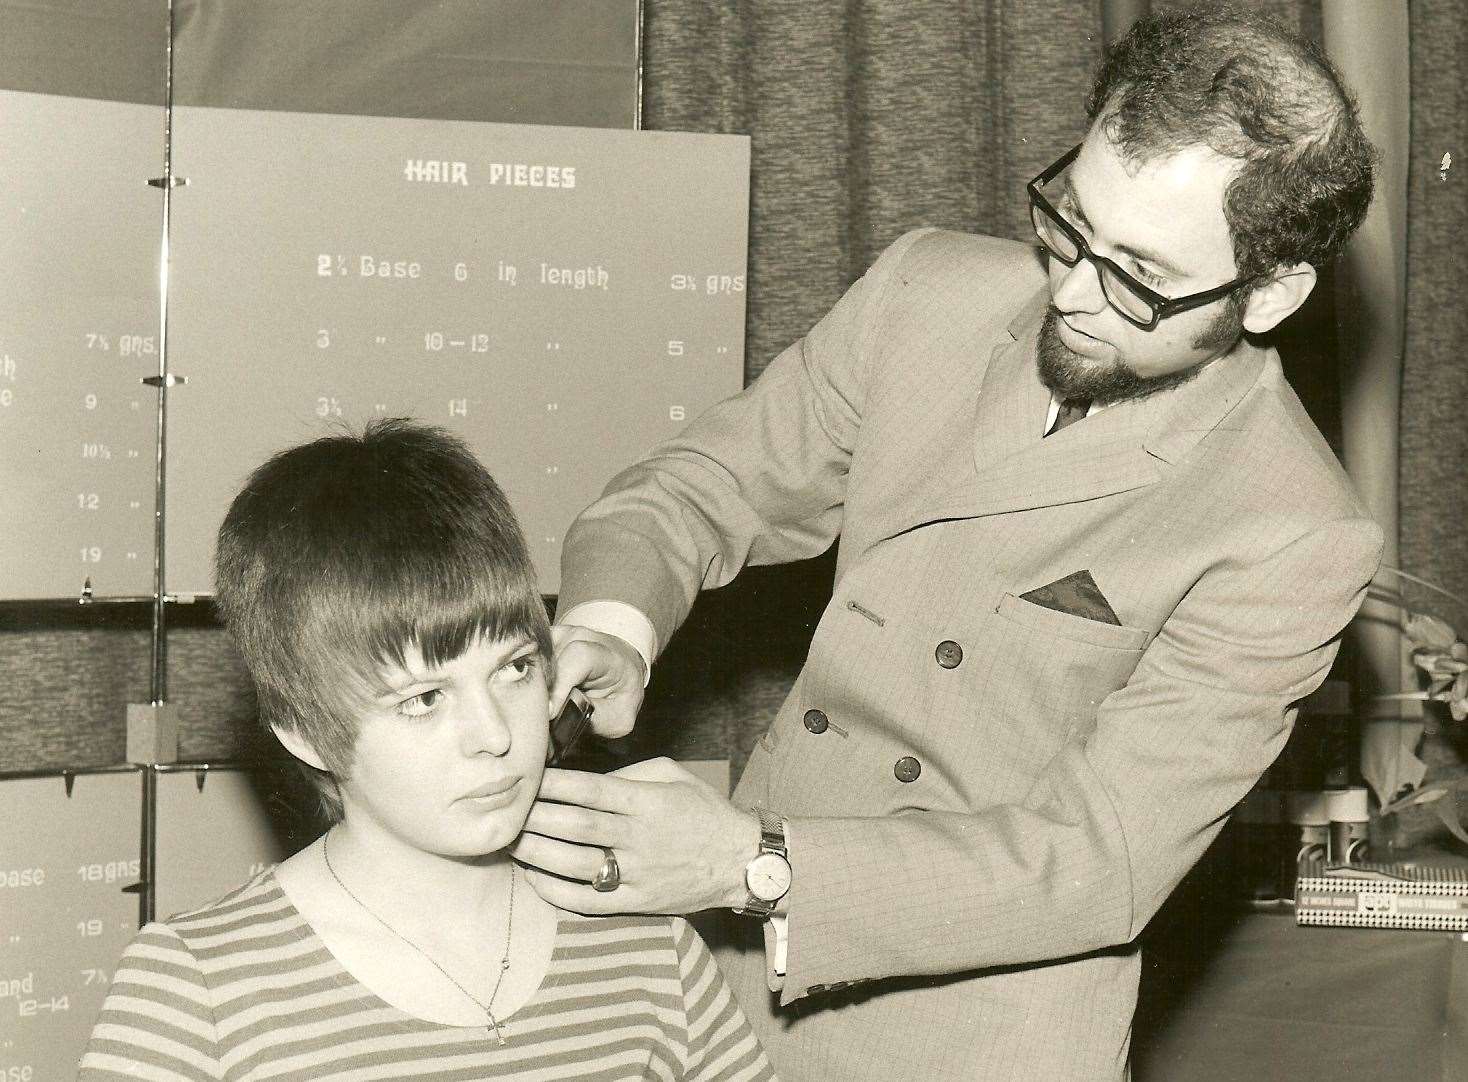 George Antoniou - pictured cutting hair in the 1970s - opened the salon in Whitstable in 1984.